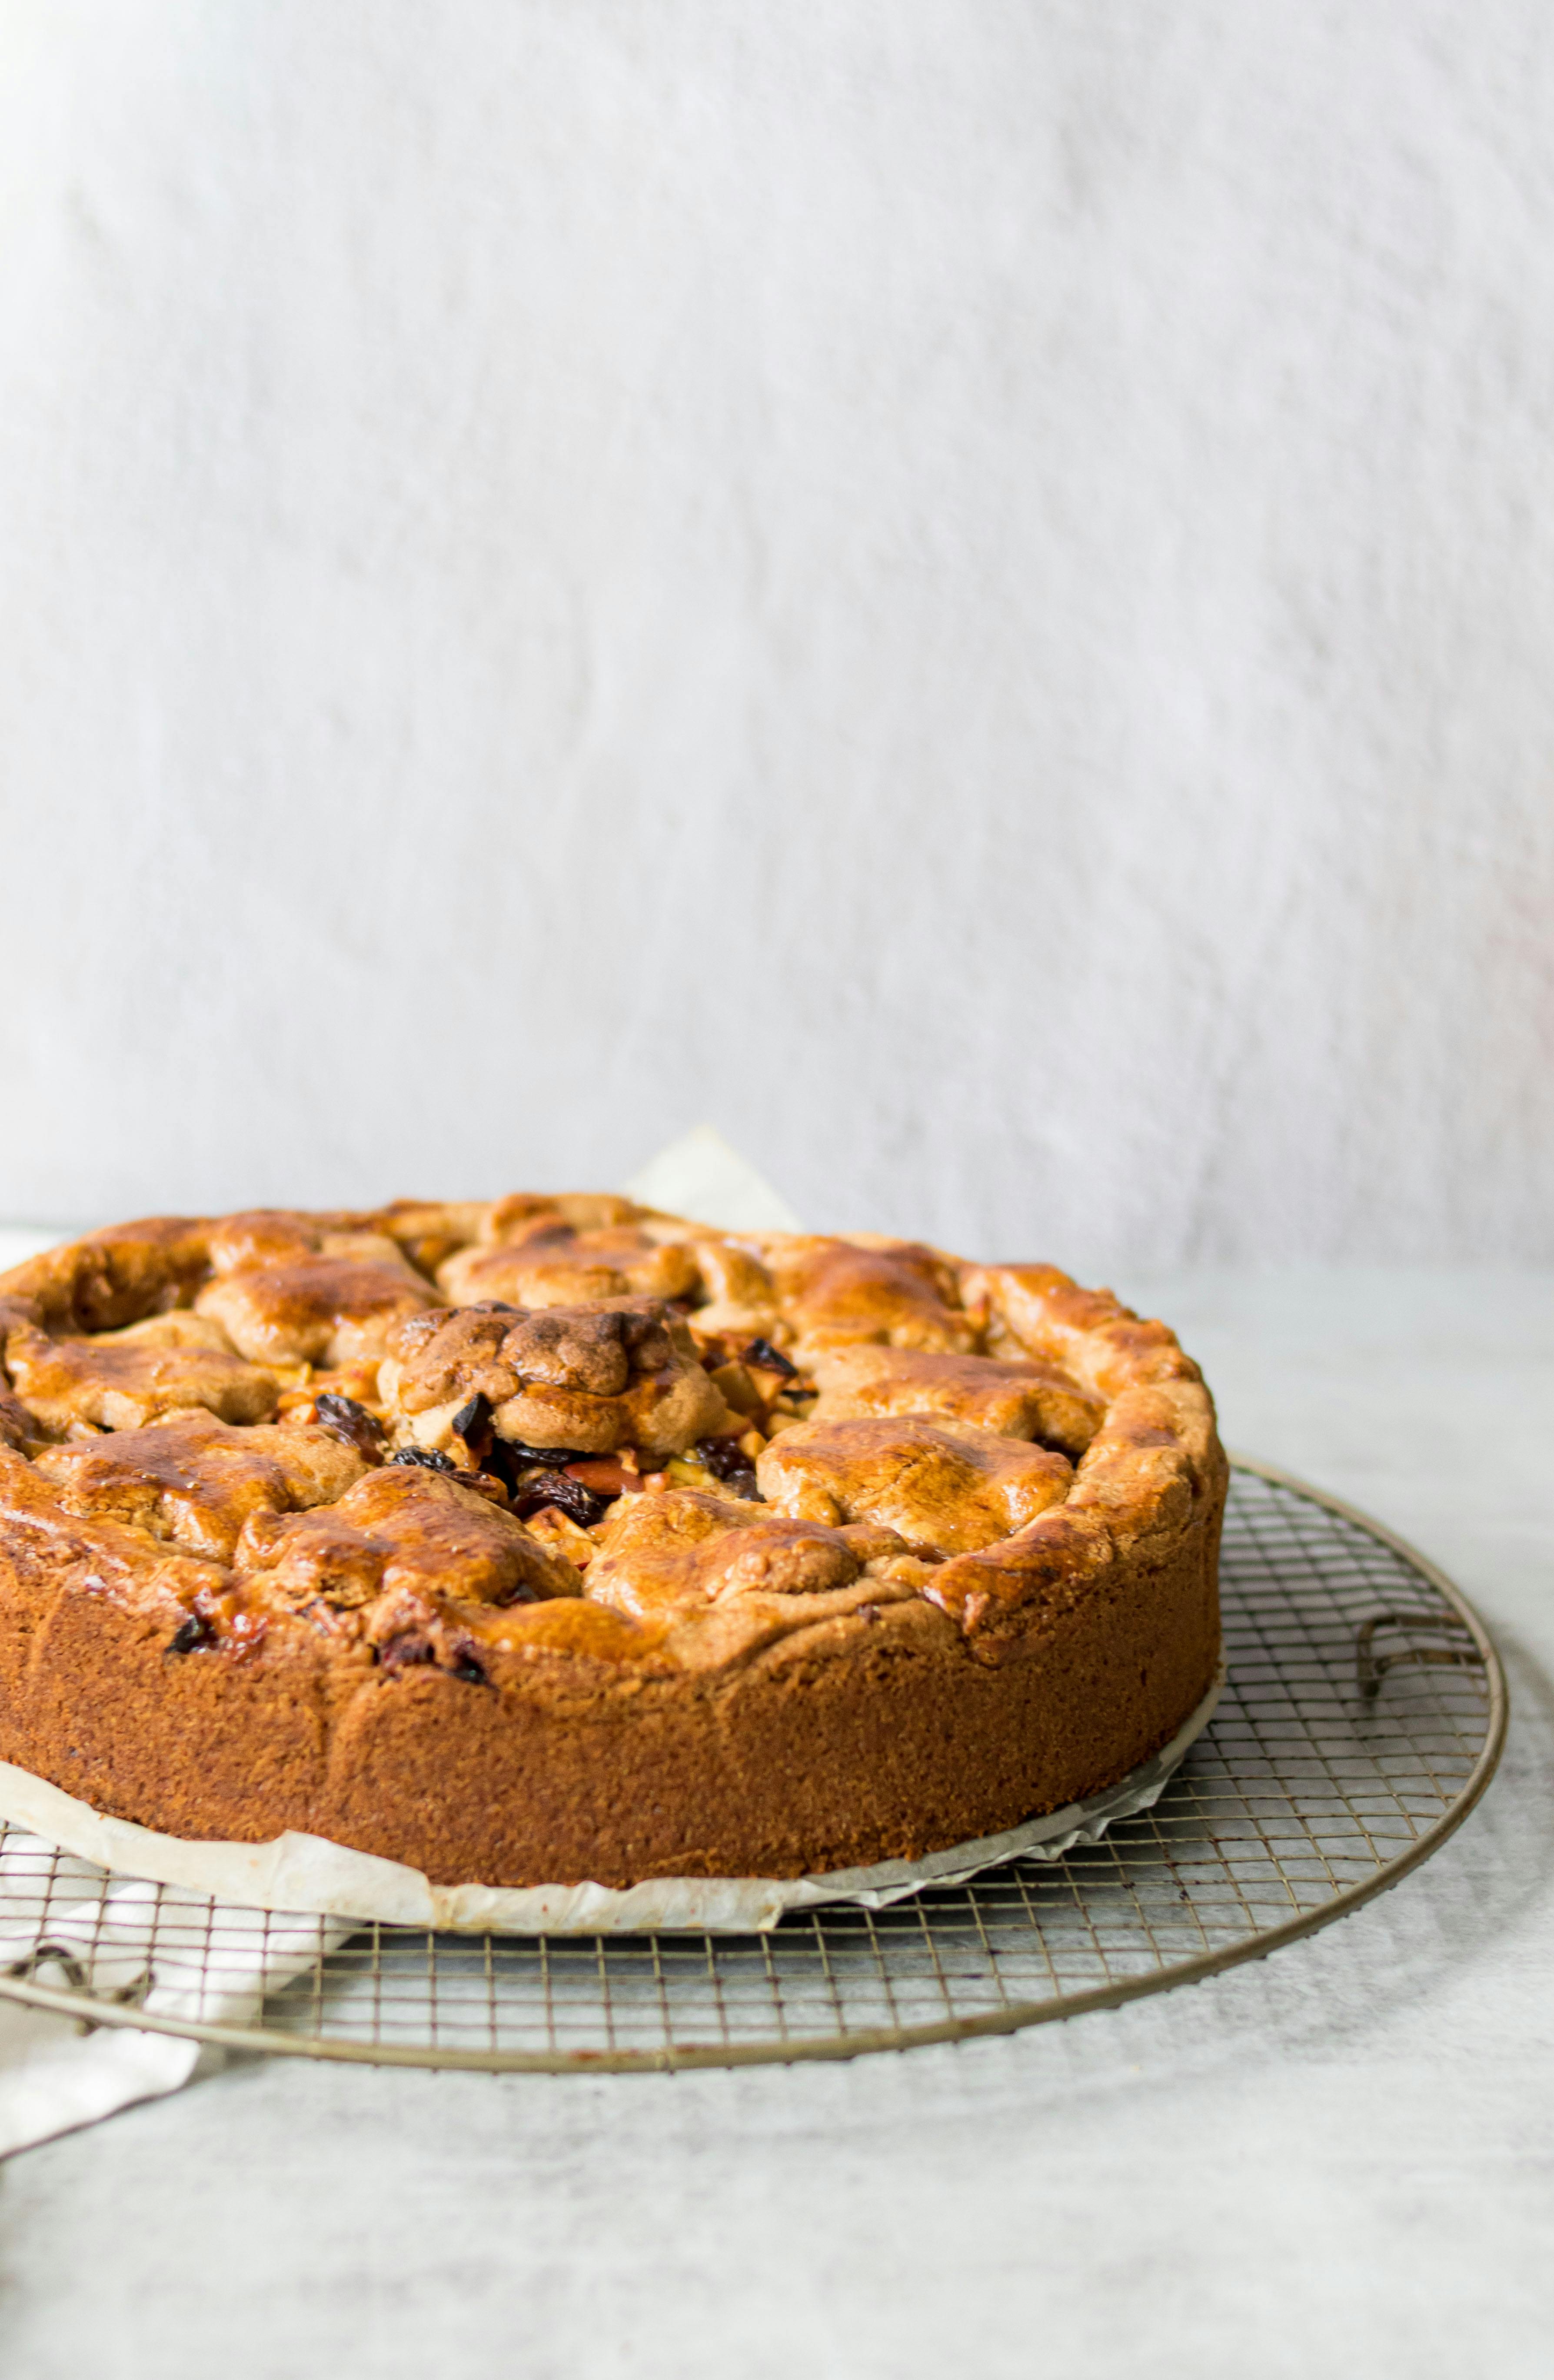 Brown pie on a tray | Source: Pexels